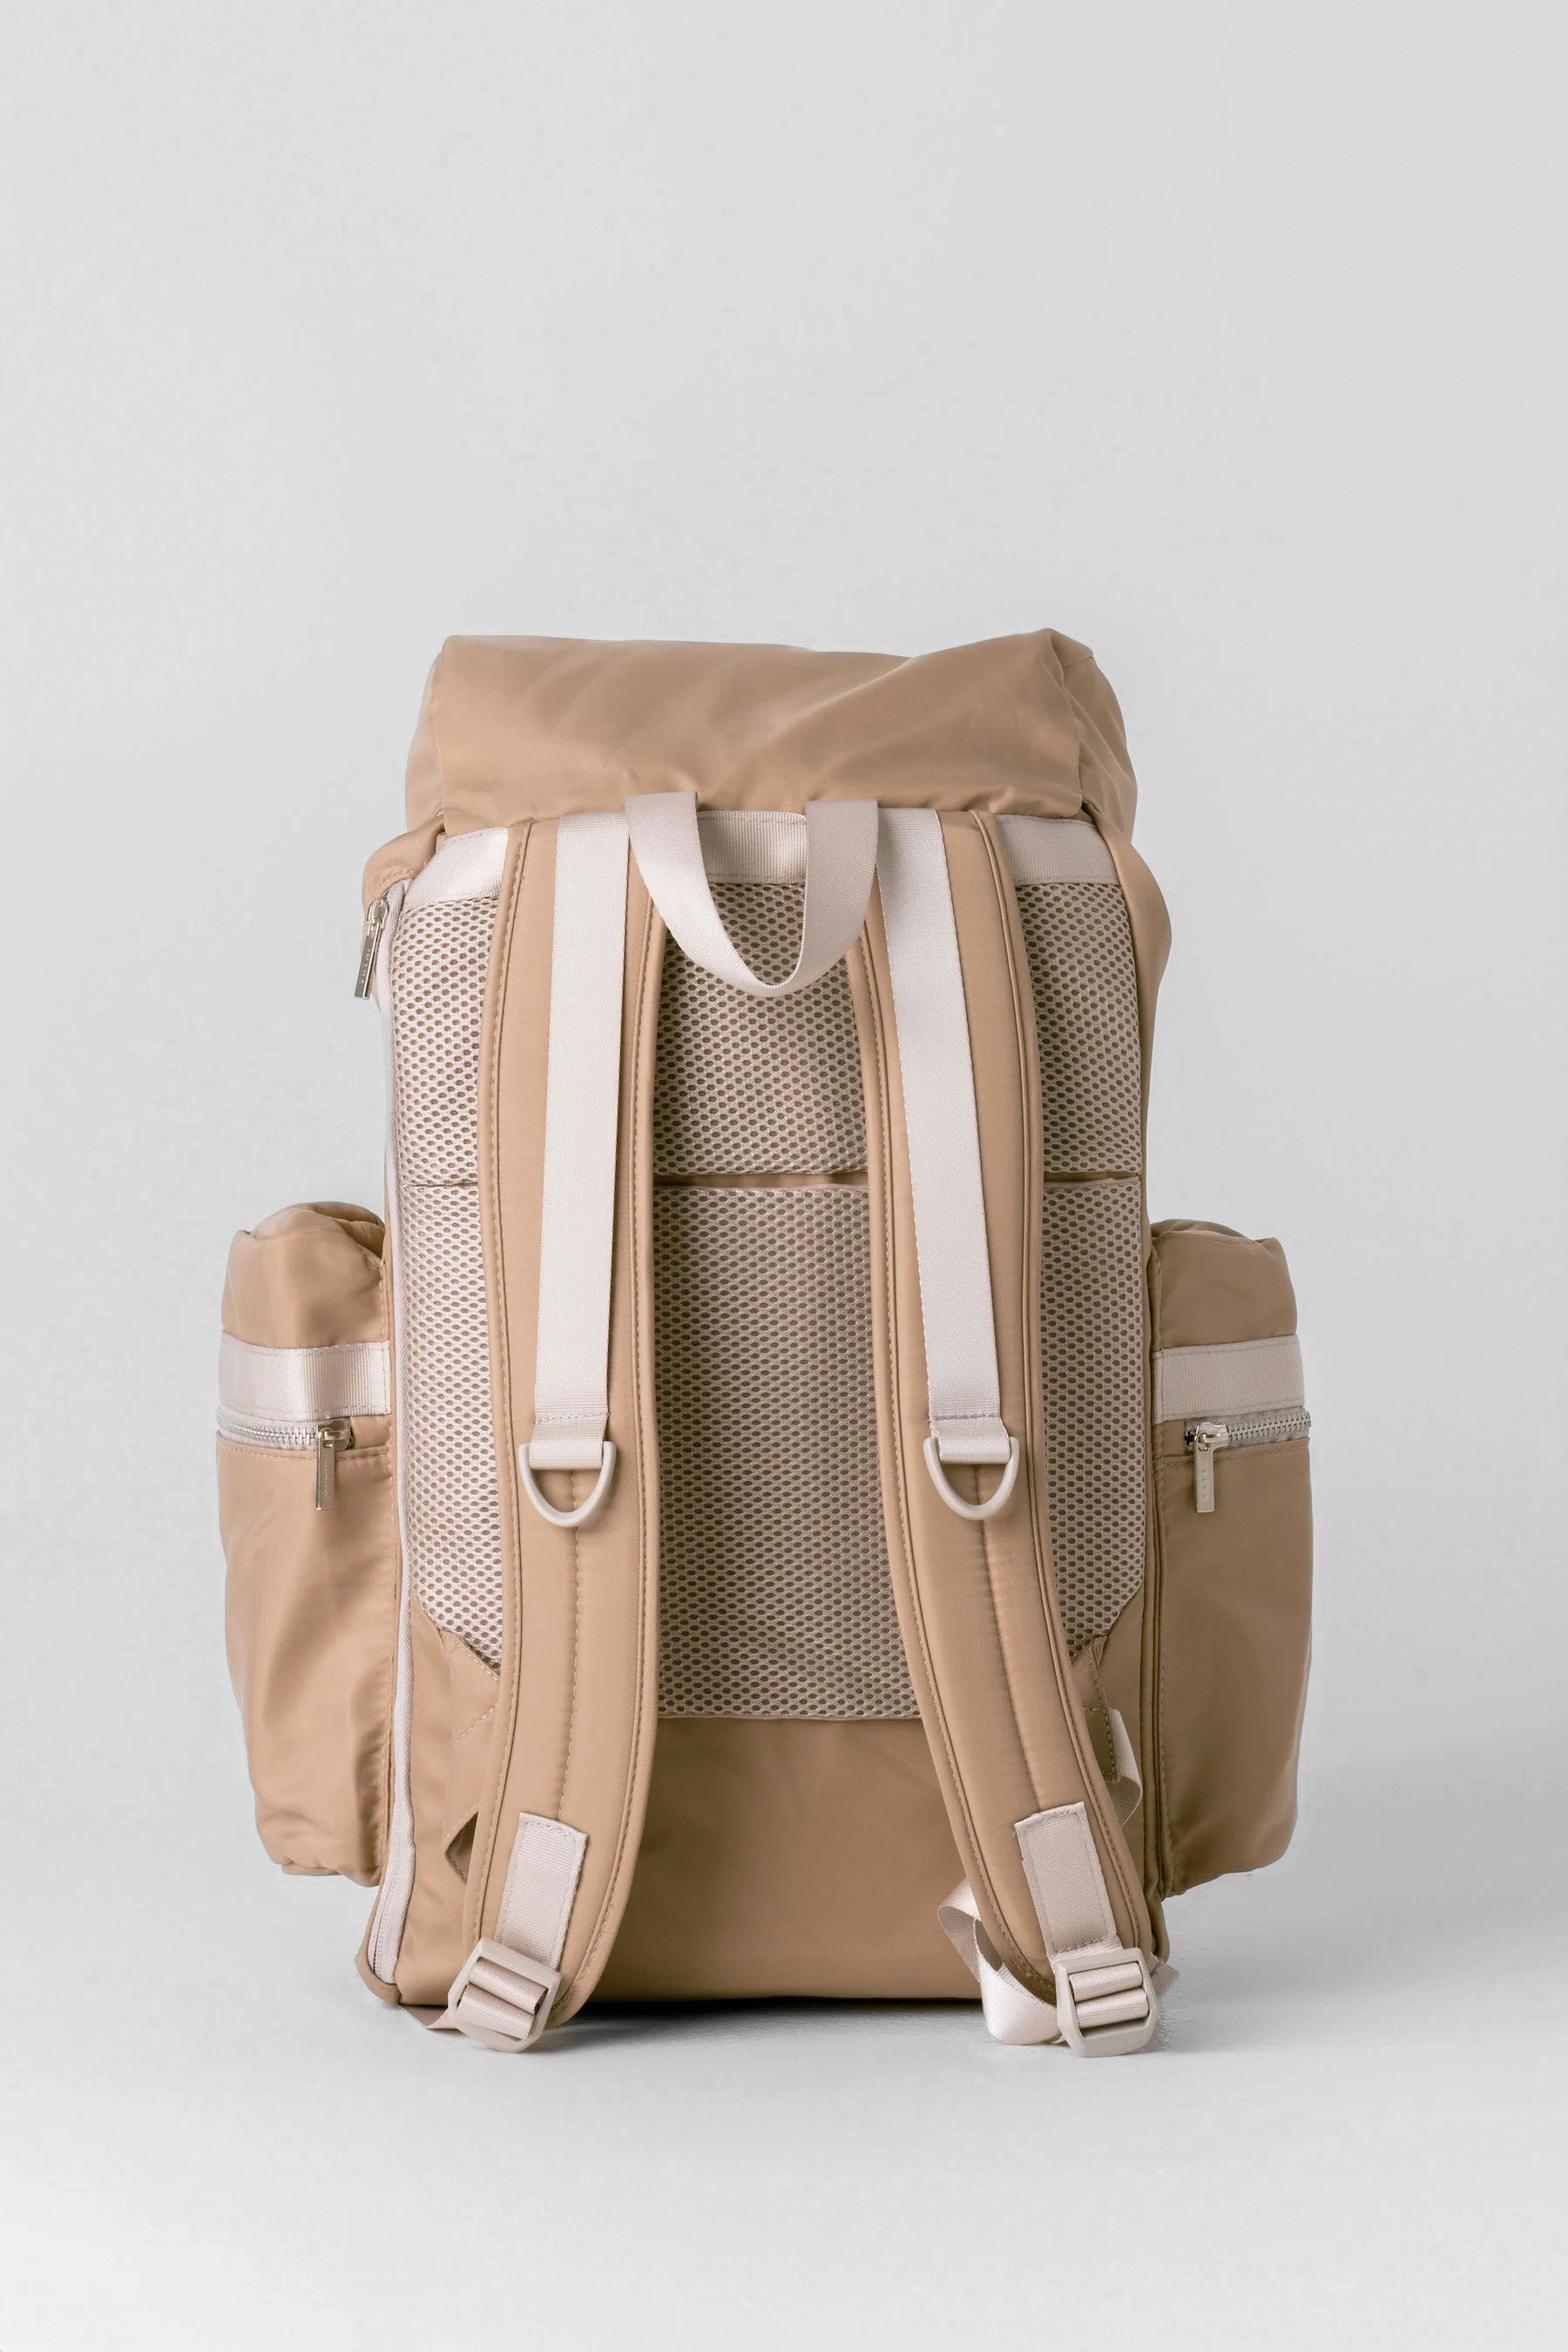 EVERYDAY BACKPACK - TAN